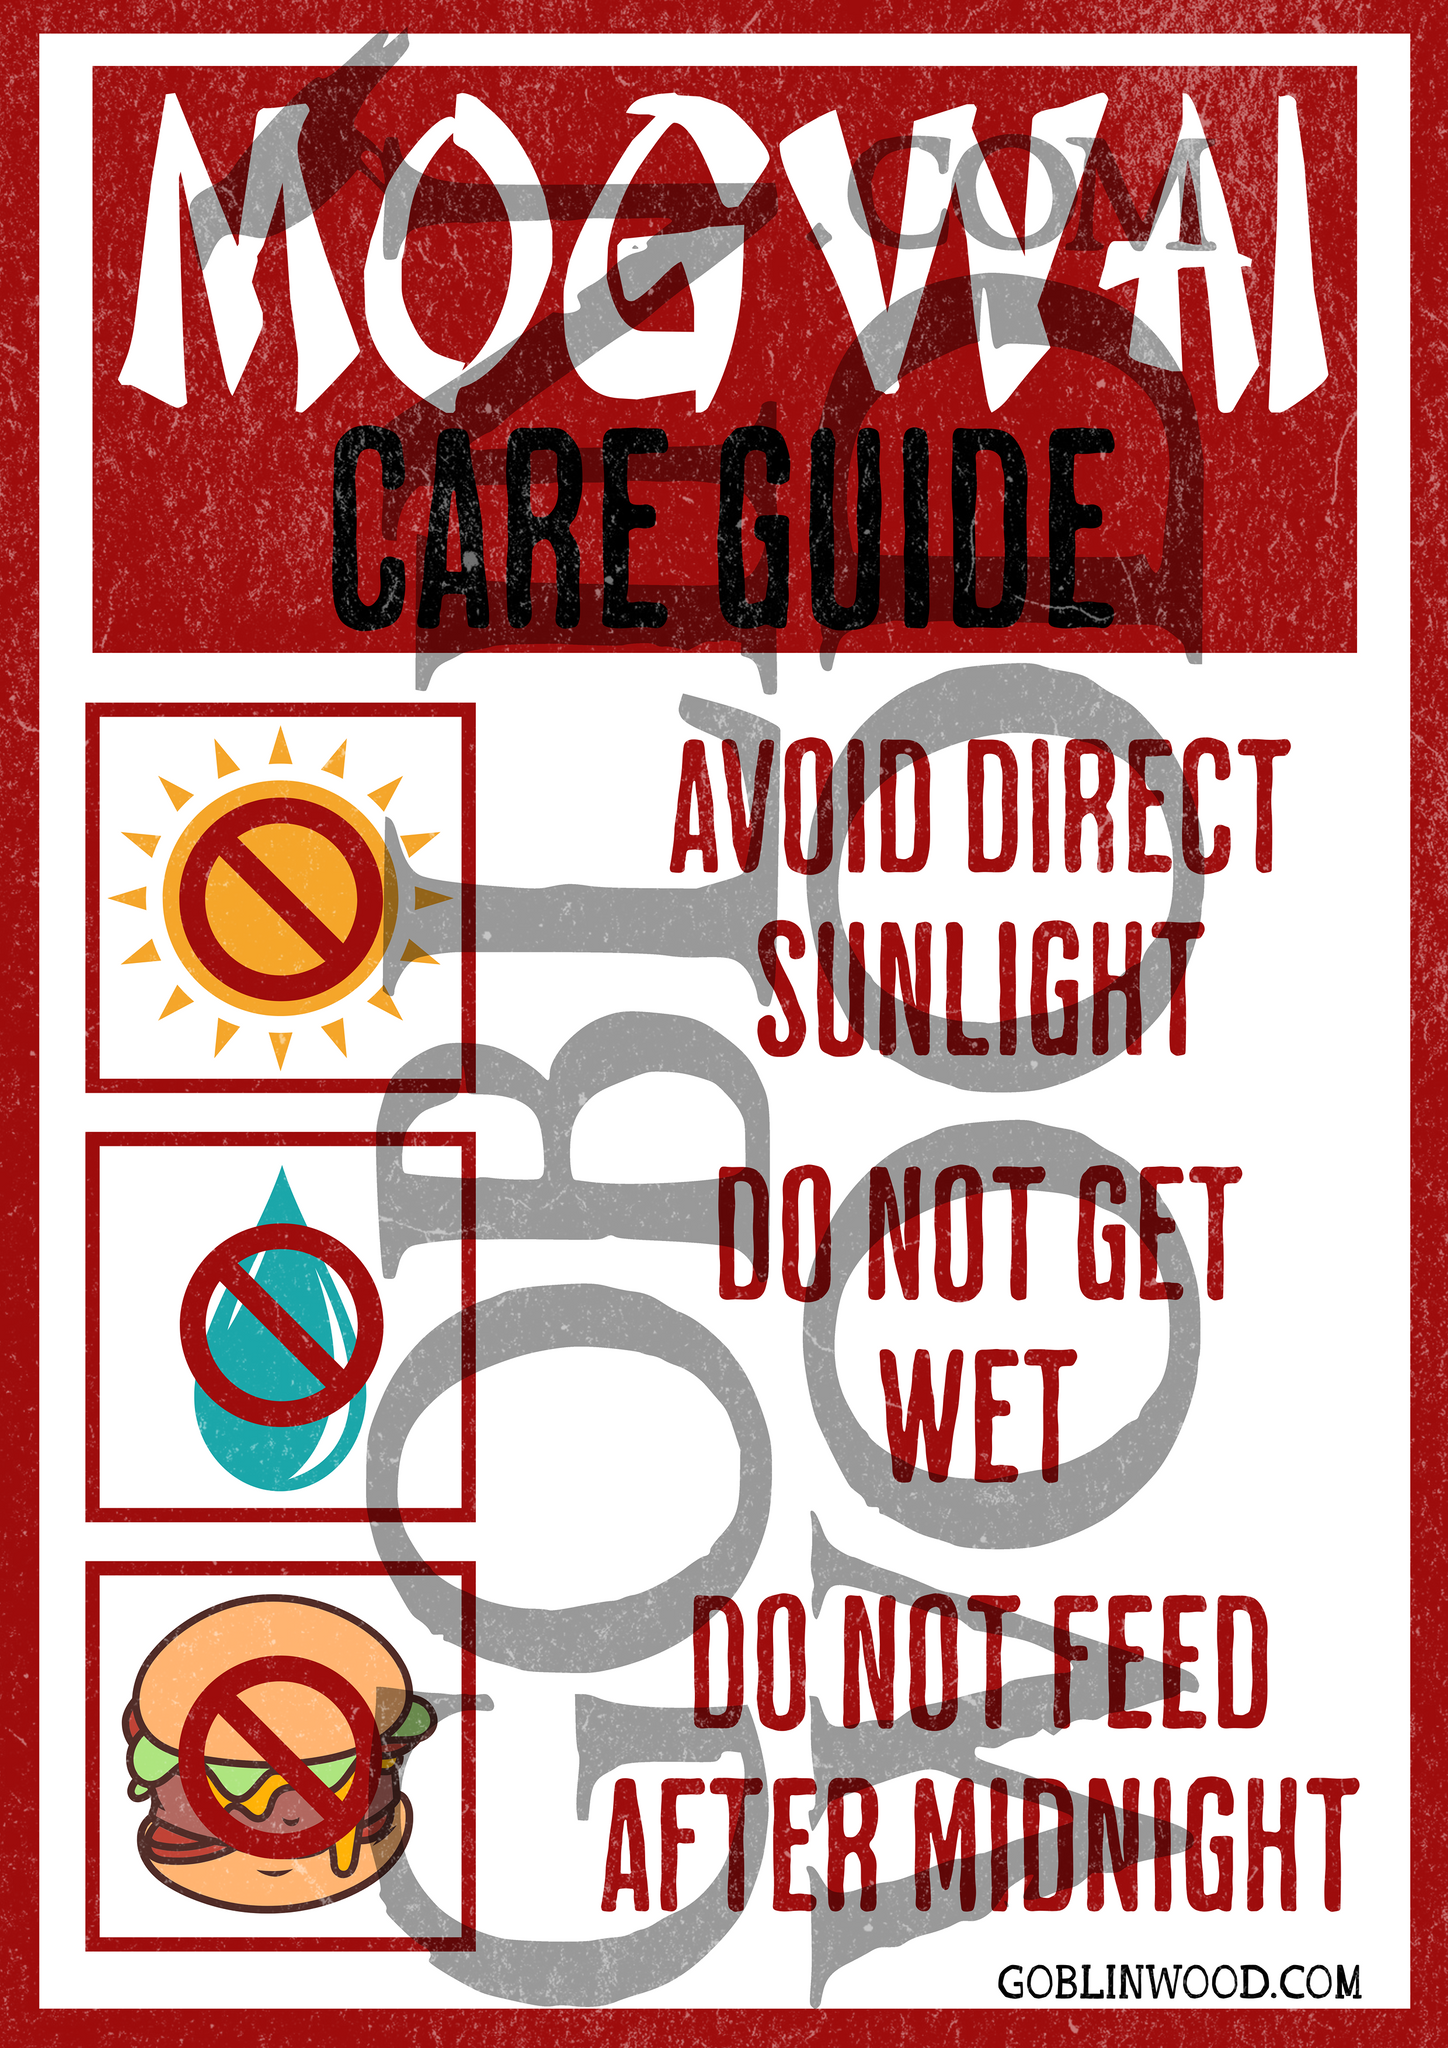 Mogwai Care Guide Plaque - Gremlins Inspired - Goblin Wood Exclusive